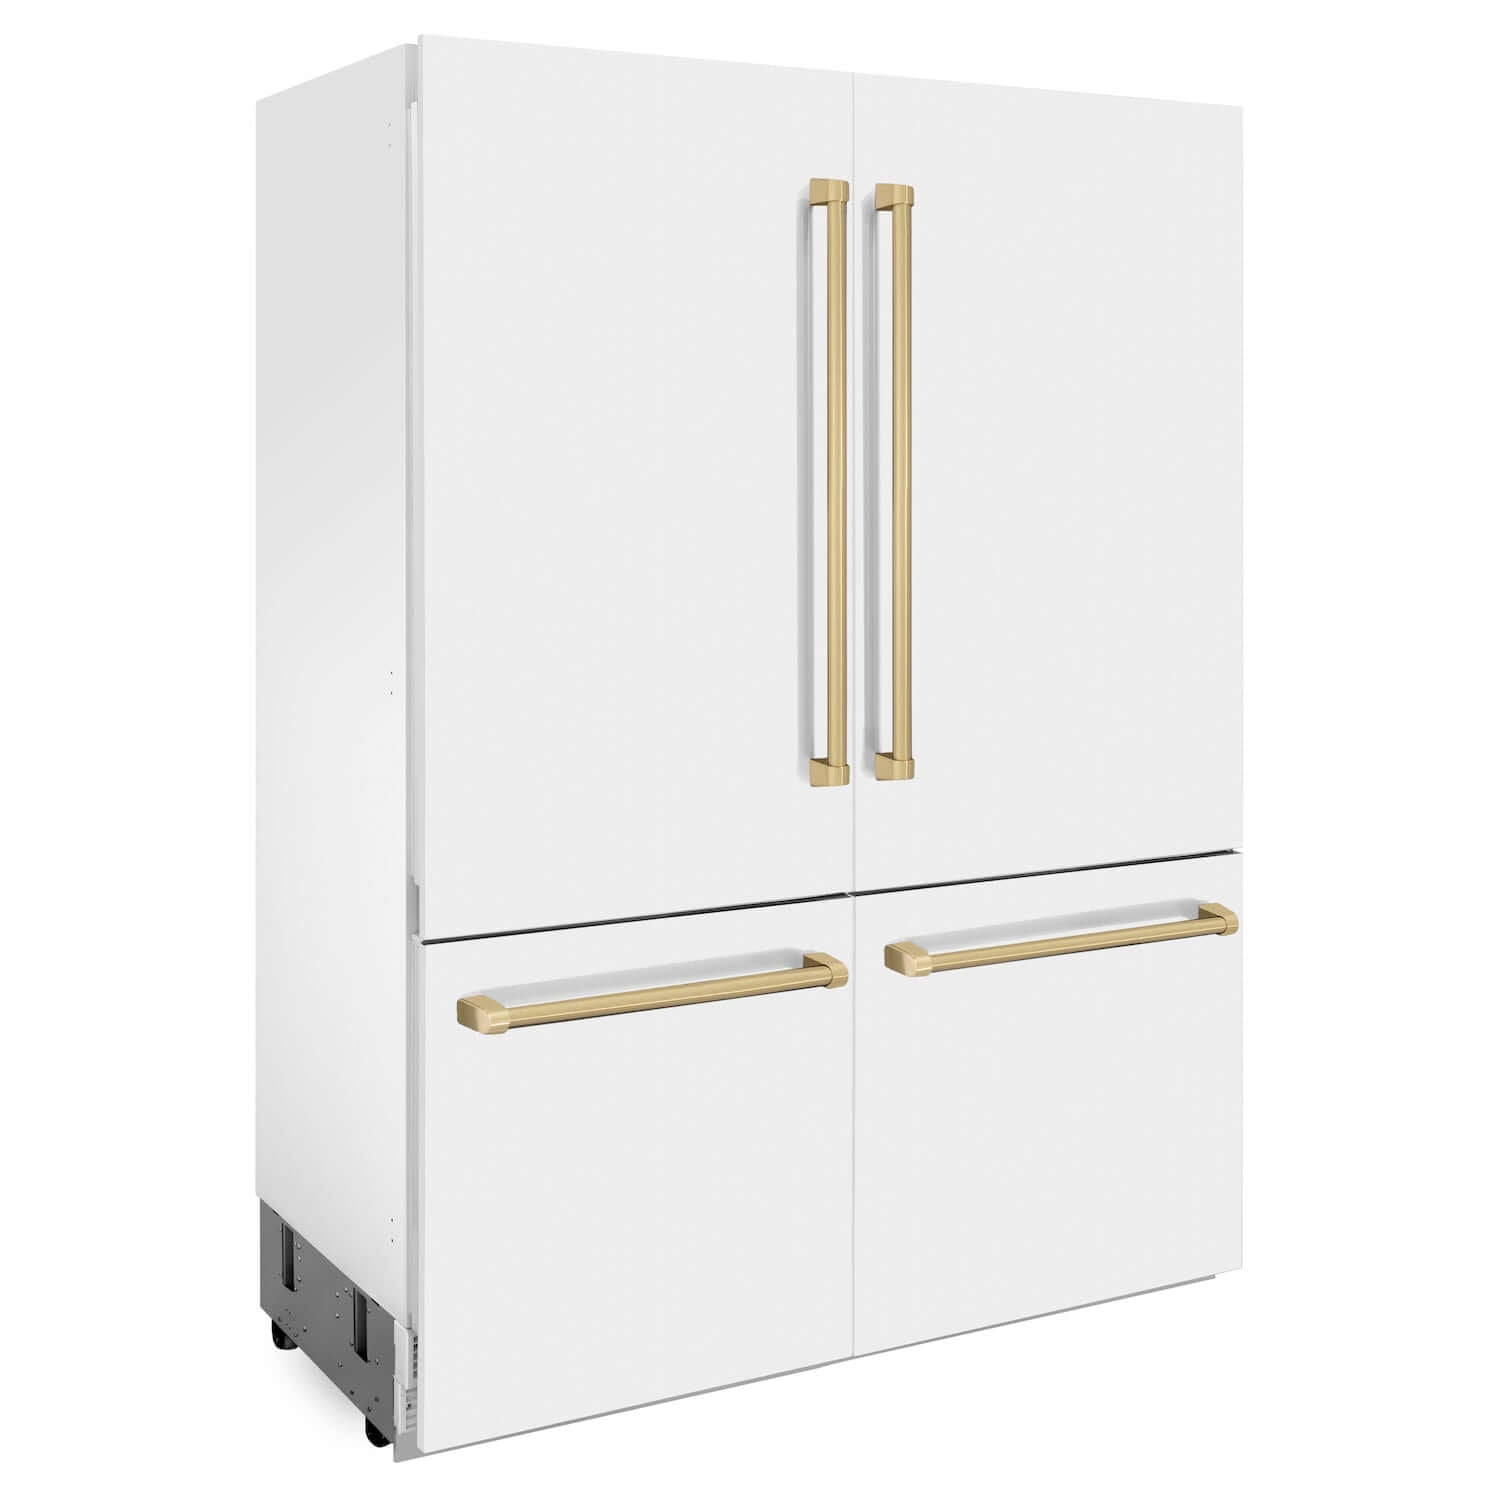 ZLINE 60" Autograph Edition 32.2 cu. ft. Built-in 4-Door French Door Refrigerator with Internal Water and Ice Dispenser in White Matte with Champagne Bronze Accents (RBIVZ-WM-60-CB)